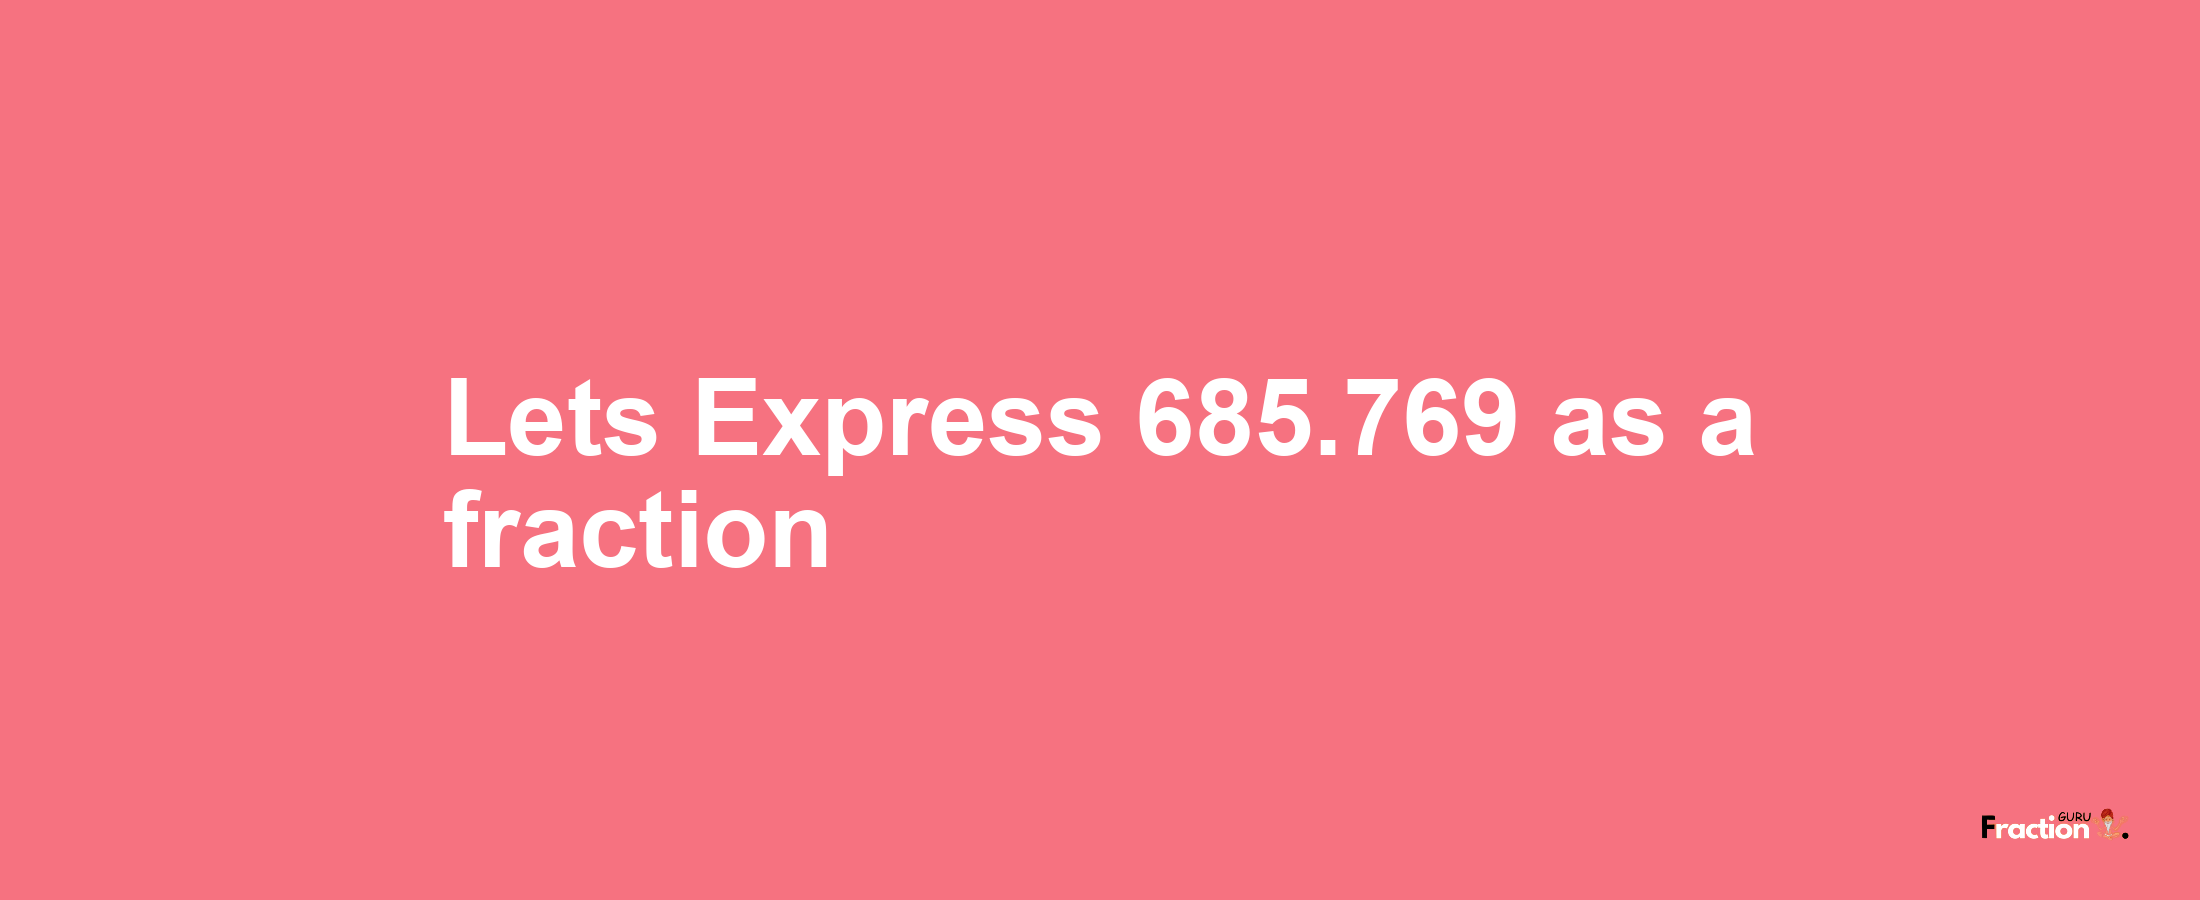 Lets Express 685.769 as afraction